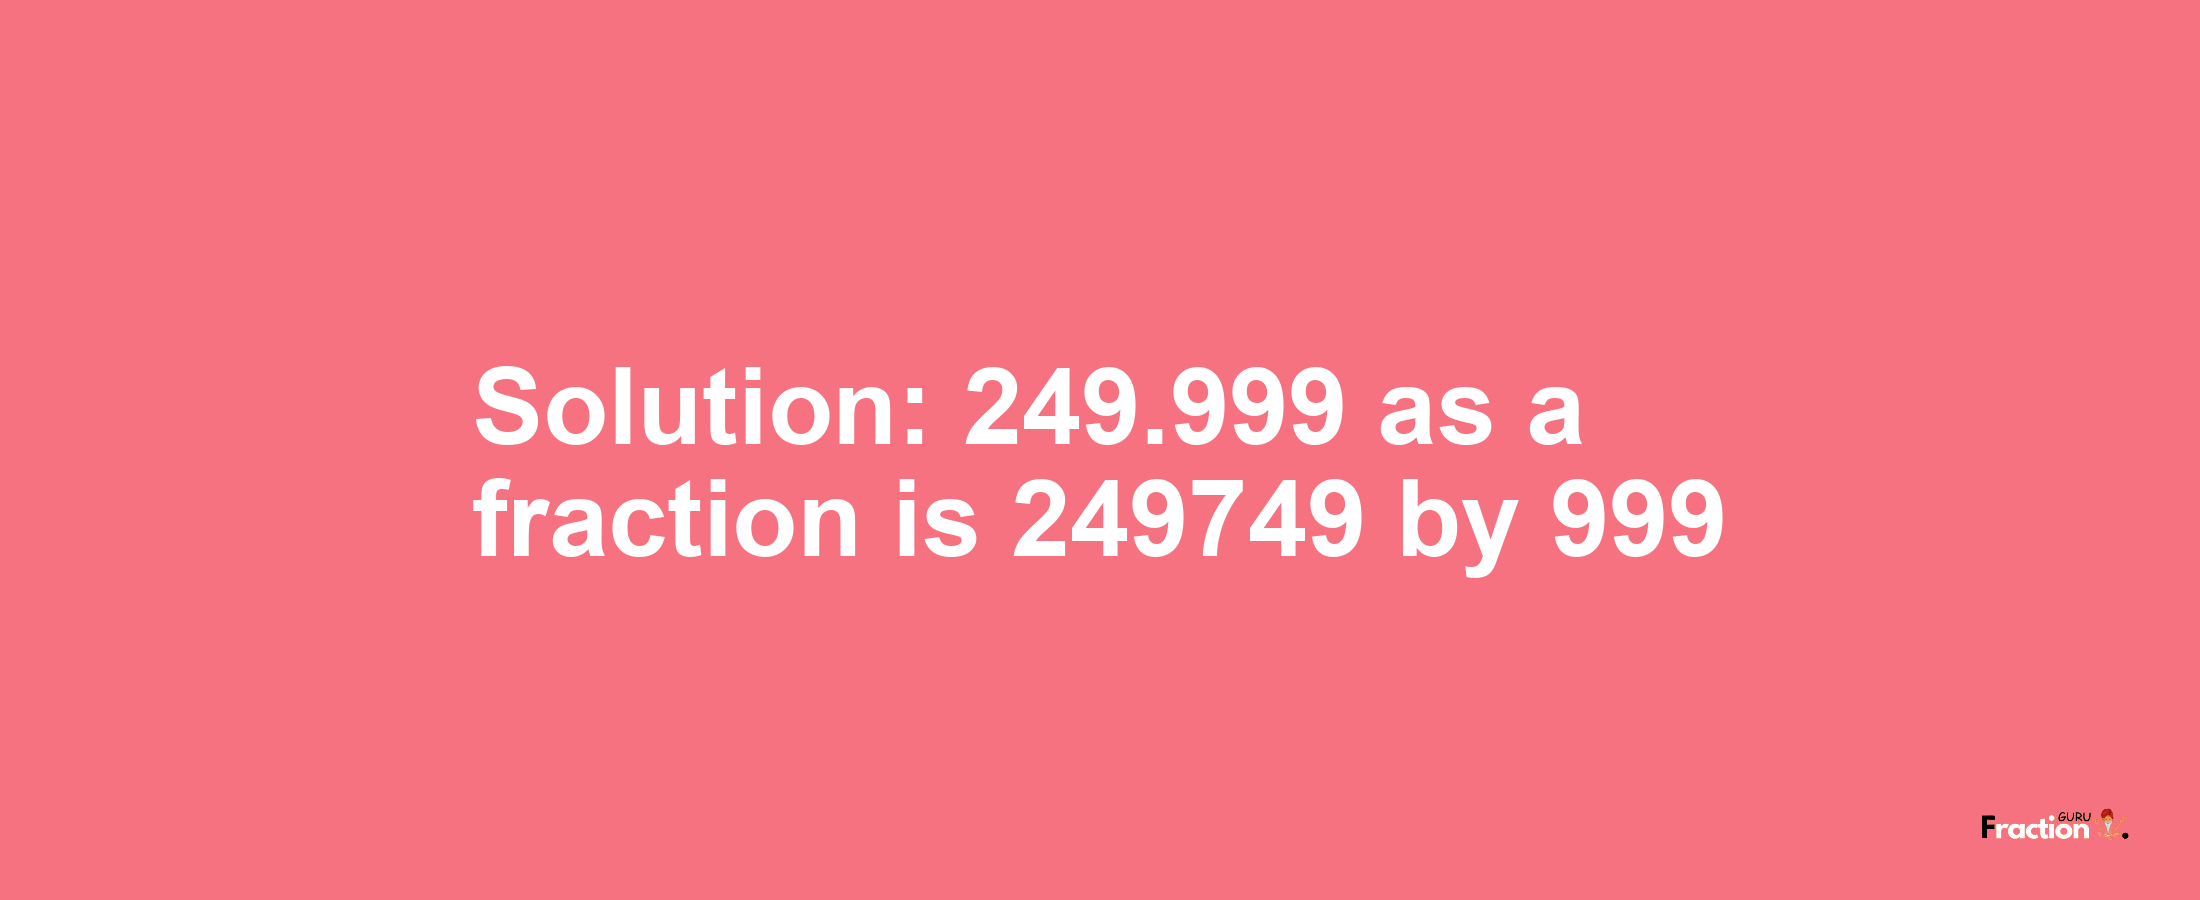 Solution:249.999 as a fraction is 249749/999